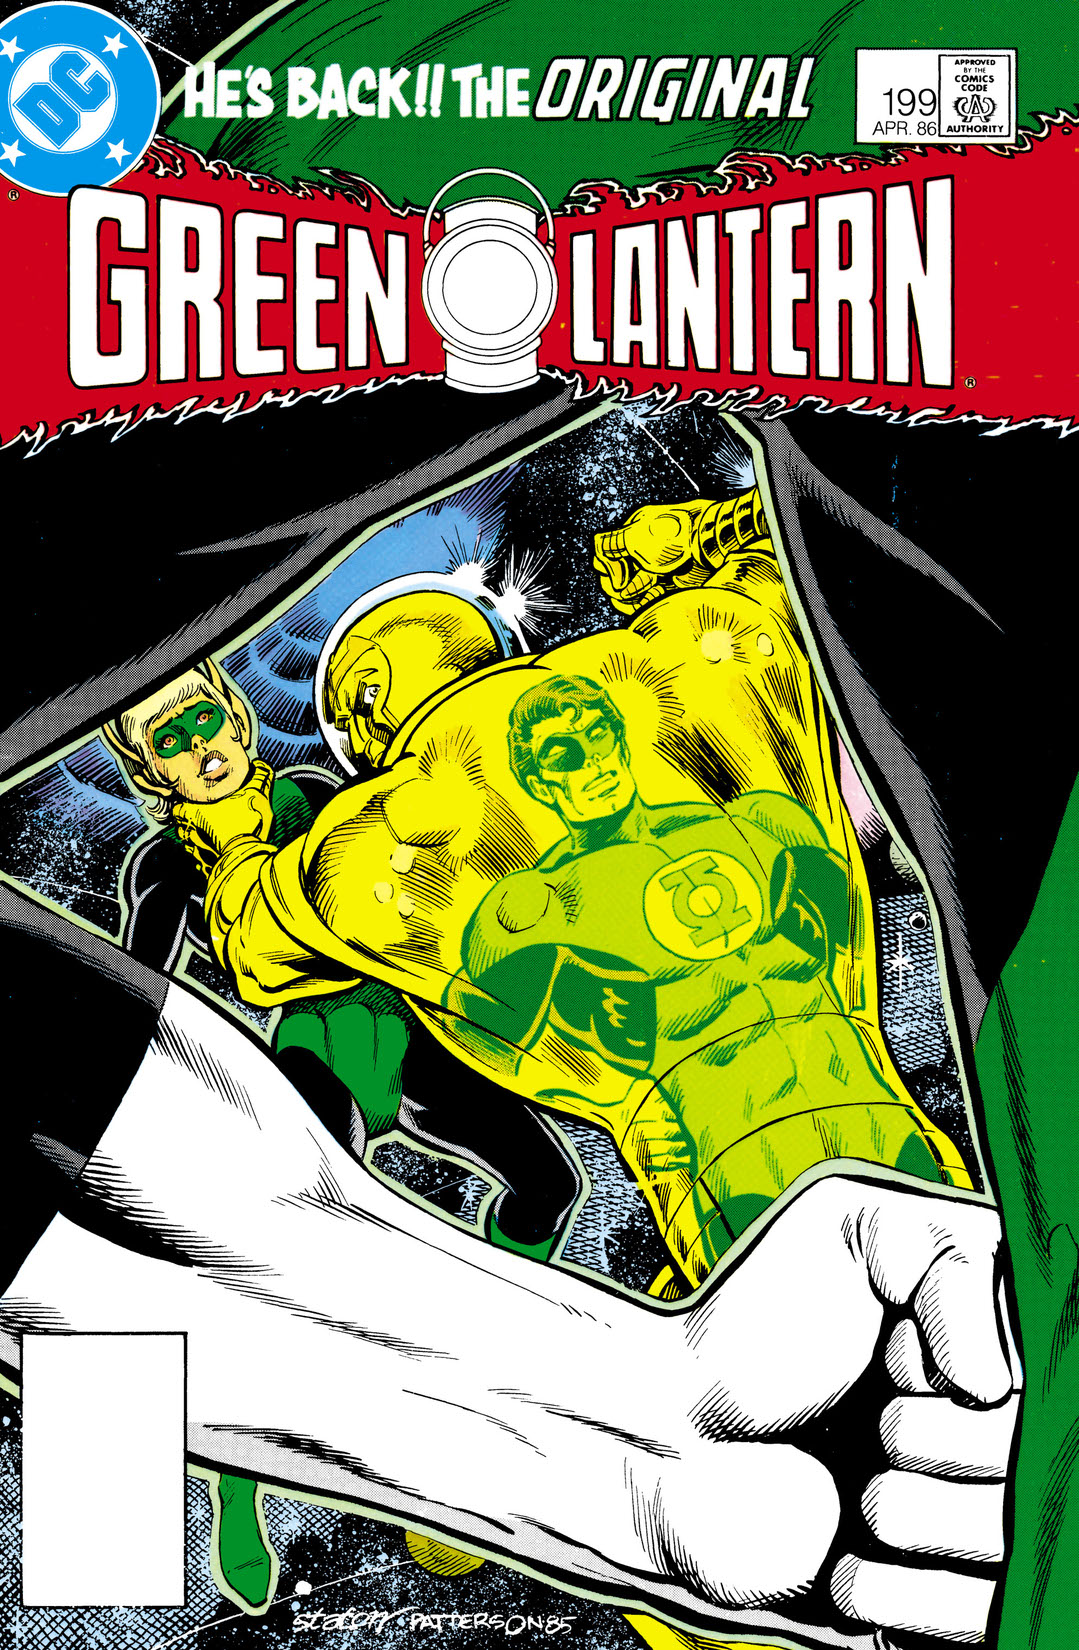 Green Lantern (1960-) #199 preview images